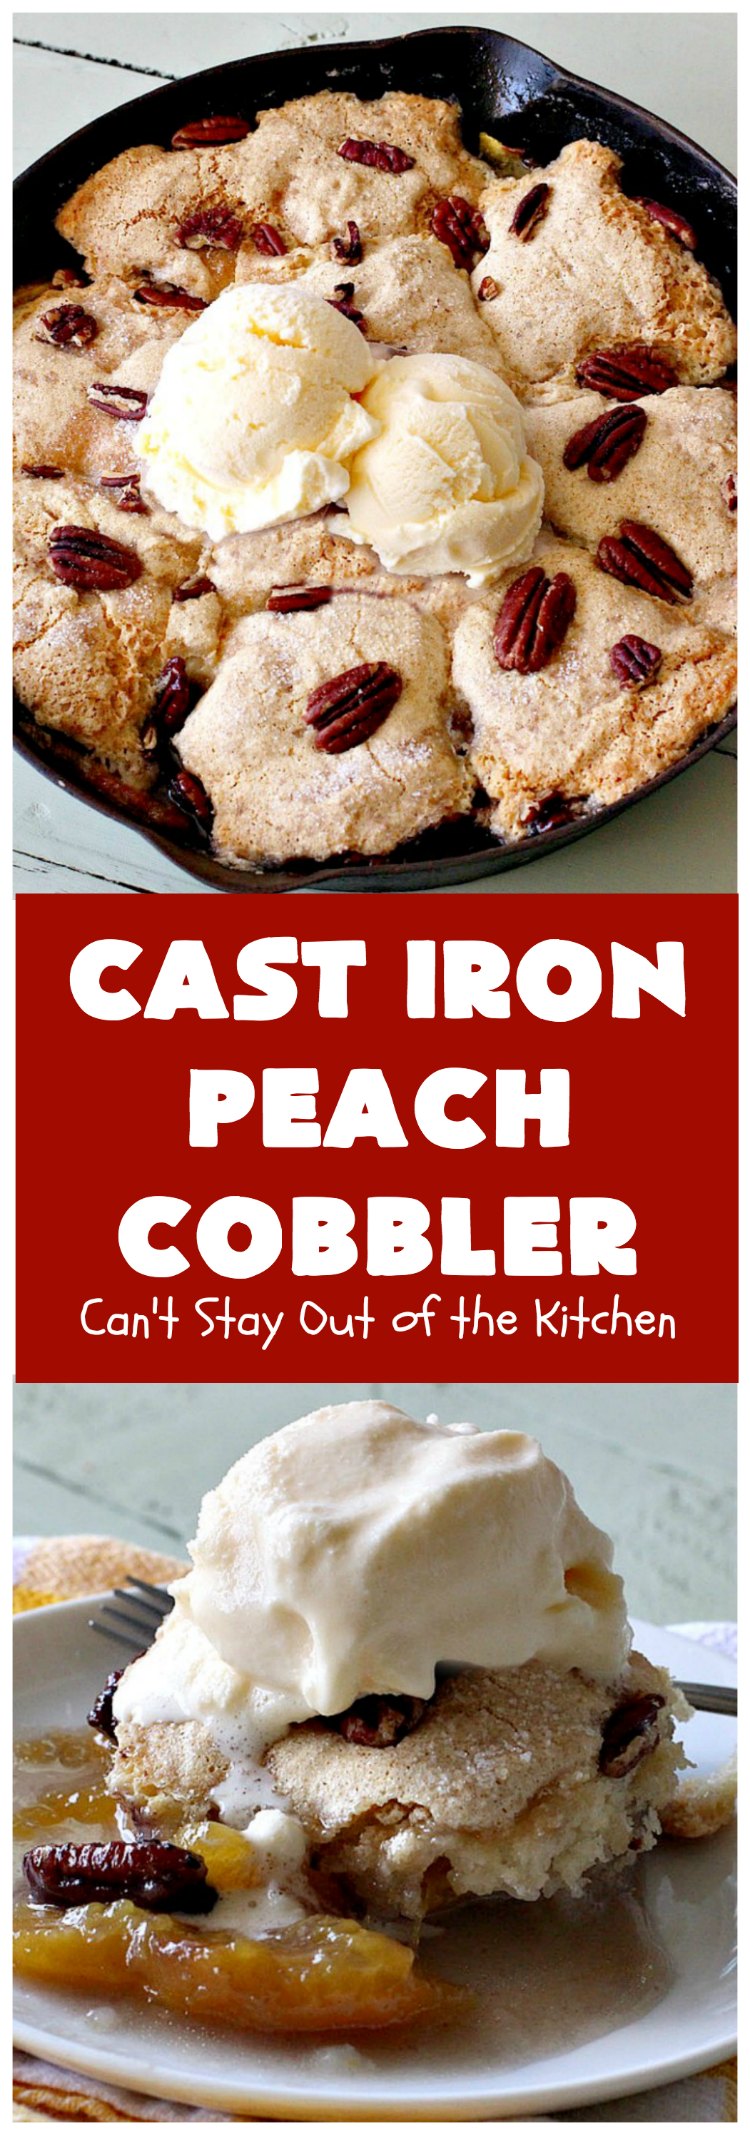 Cast Iron Peach Cobbler |  Can't Stay Out of the Kitchen | this quick and easy #recipe has a fresh #peach filling & a topping with salted, roasted #pecans. So quick to make & delicious to the taste buds. Terrific served with ice cream. #PeachCobbler #summer #southern #SummerDessert #PeachDessert #cobbler #CastIronPeachCobbler #Canbassador #WashingtonStateFruitCommission #WashingtonStoneFruitGrowers #WashingtonStateStoneFruitGrowers